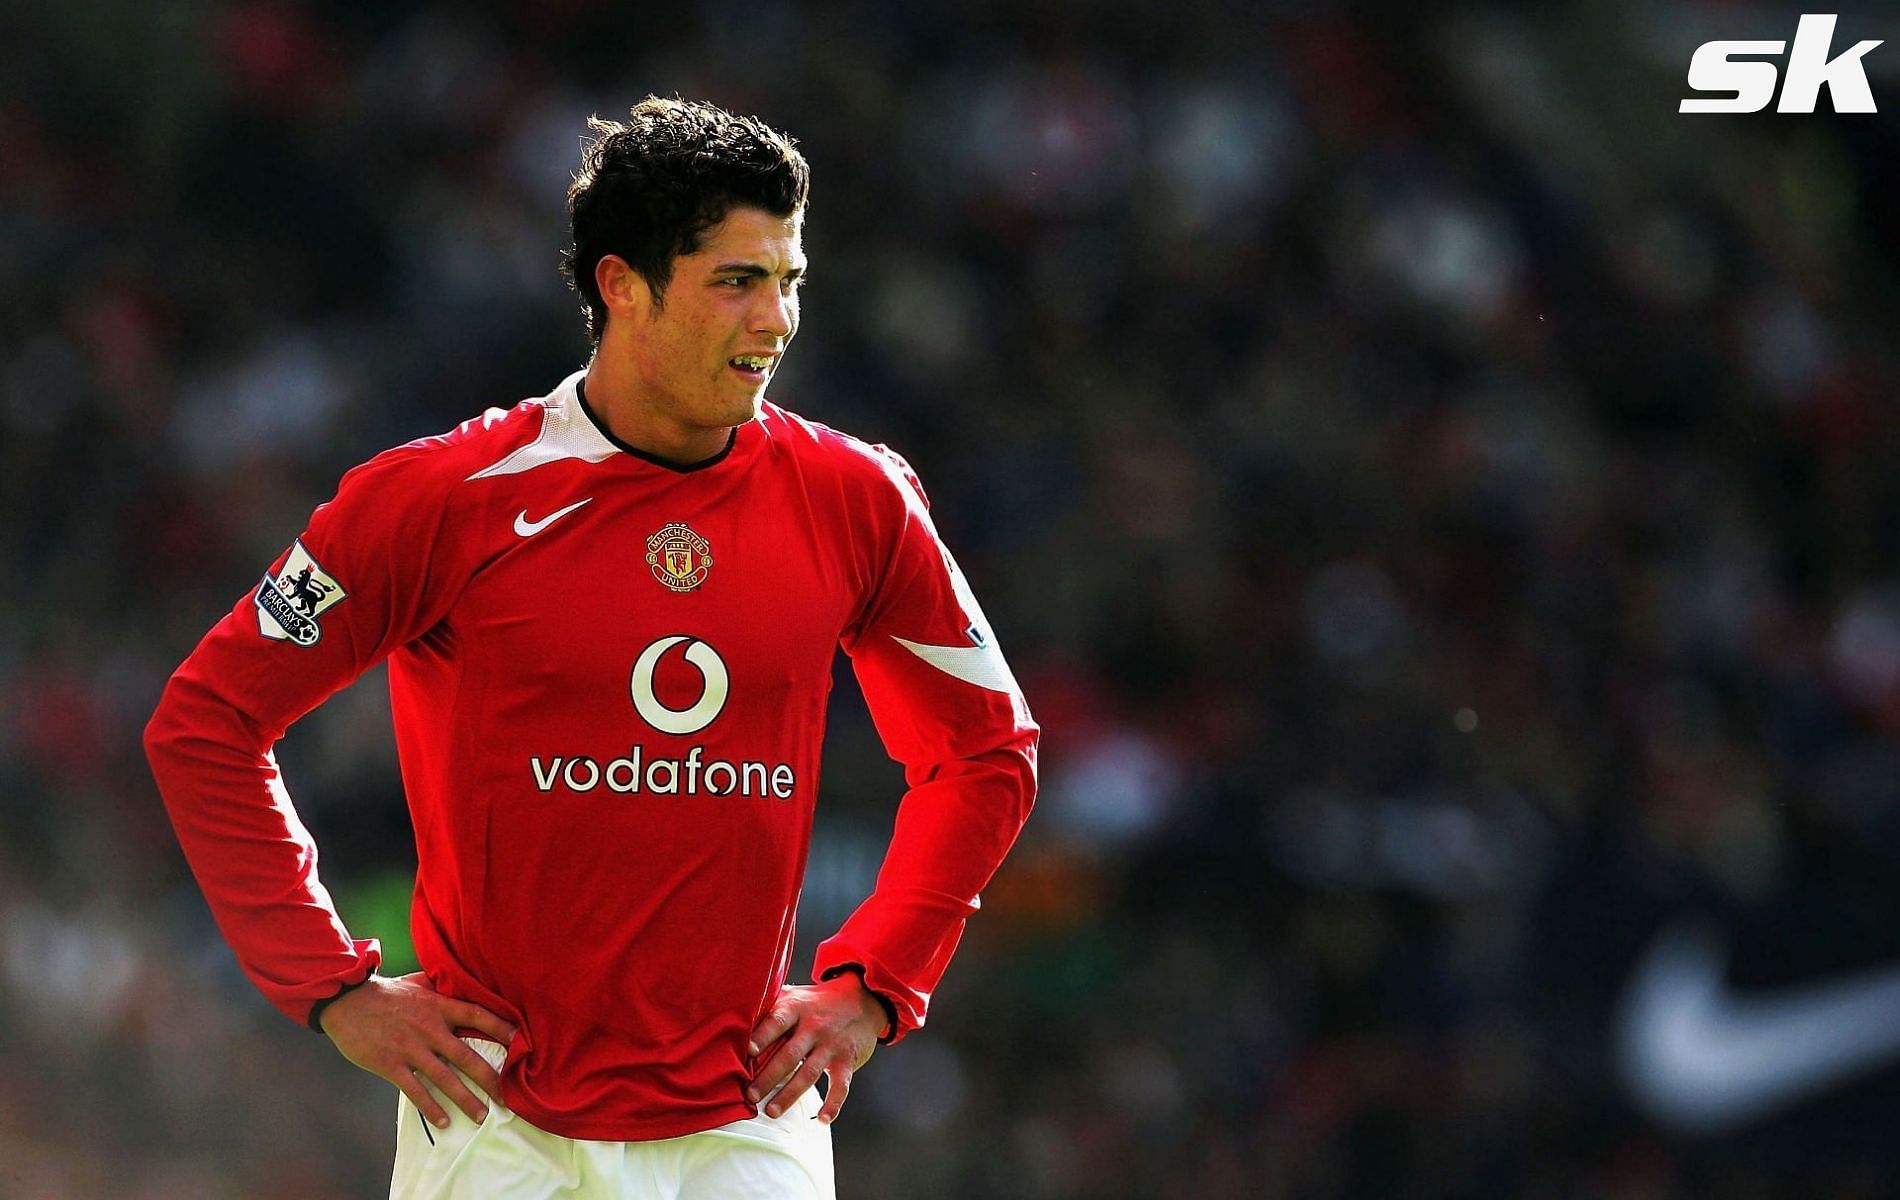 Cristiano Ronaldo was the sixth most valuable young prospect in 2004